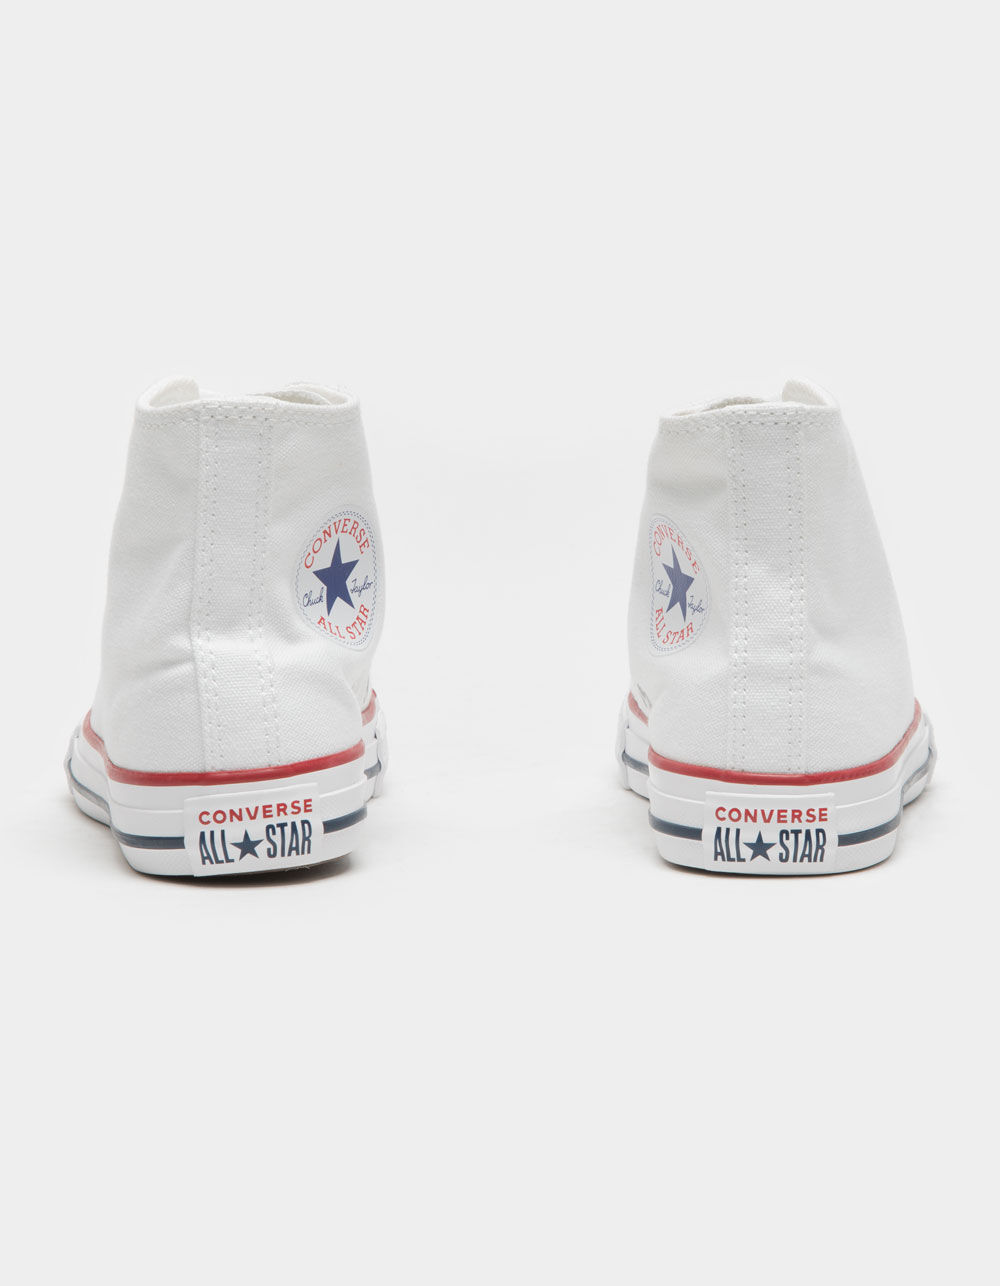 drivhus vand blomsten Hovedgade CONVERSE Chuck Taylor All Star High Top Kids Shoes - WHITE | Tillys